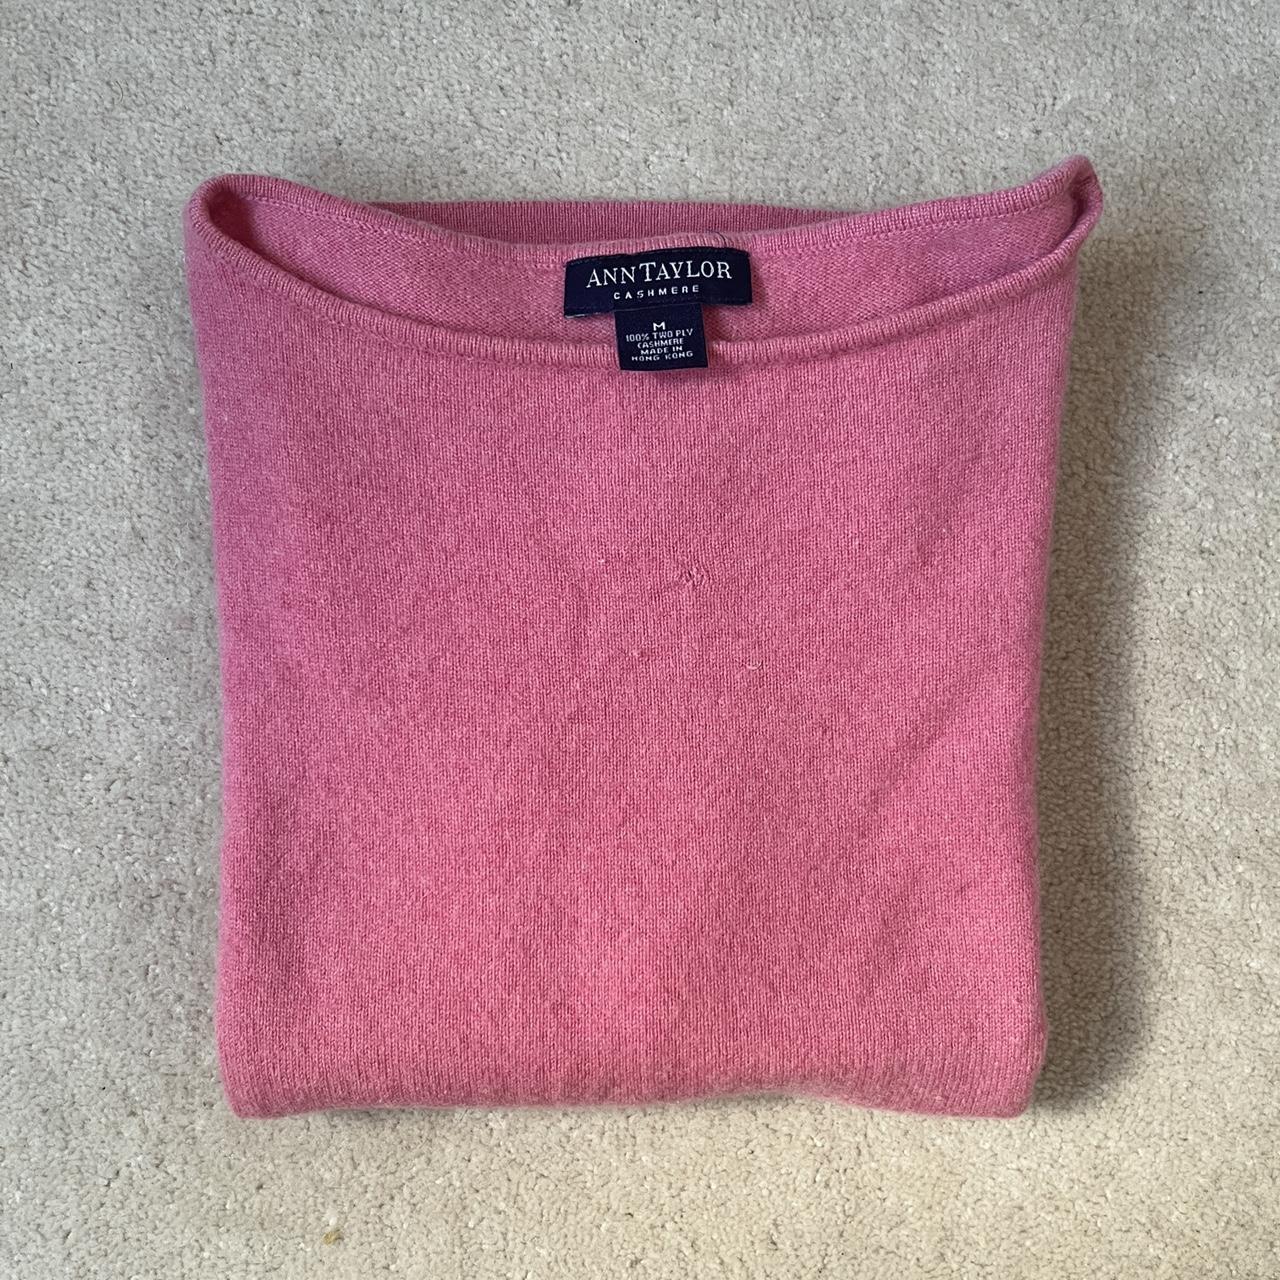 Pink cropped cashmere vest - very soft and great for... - Depop